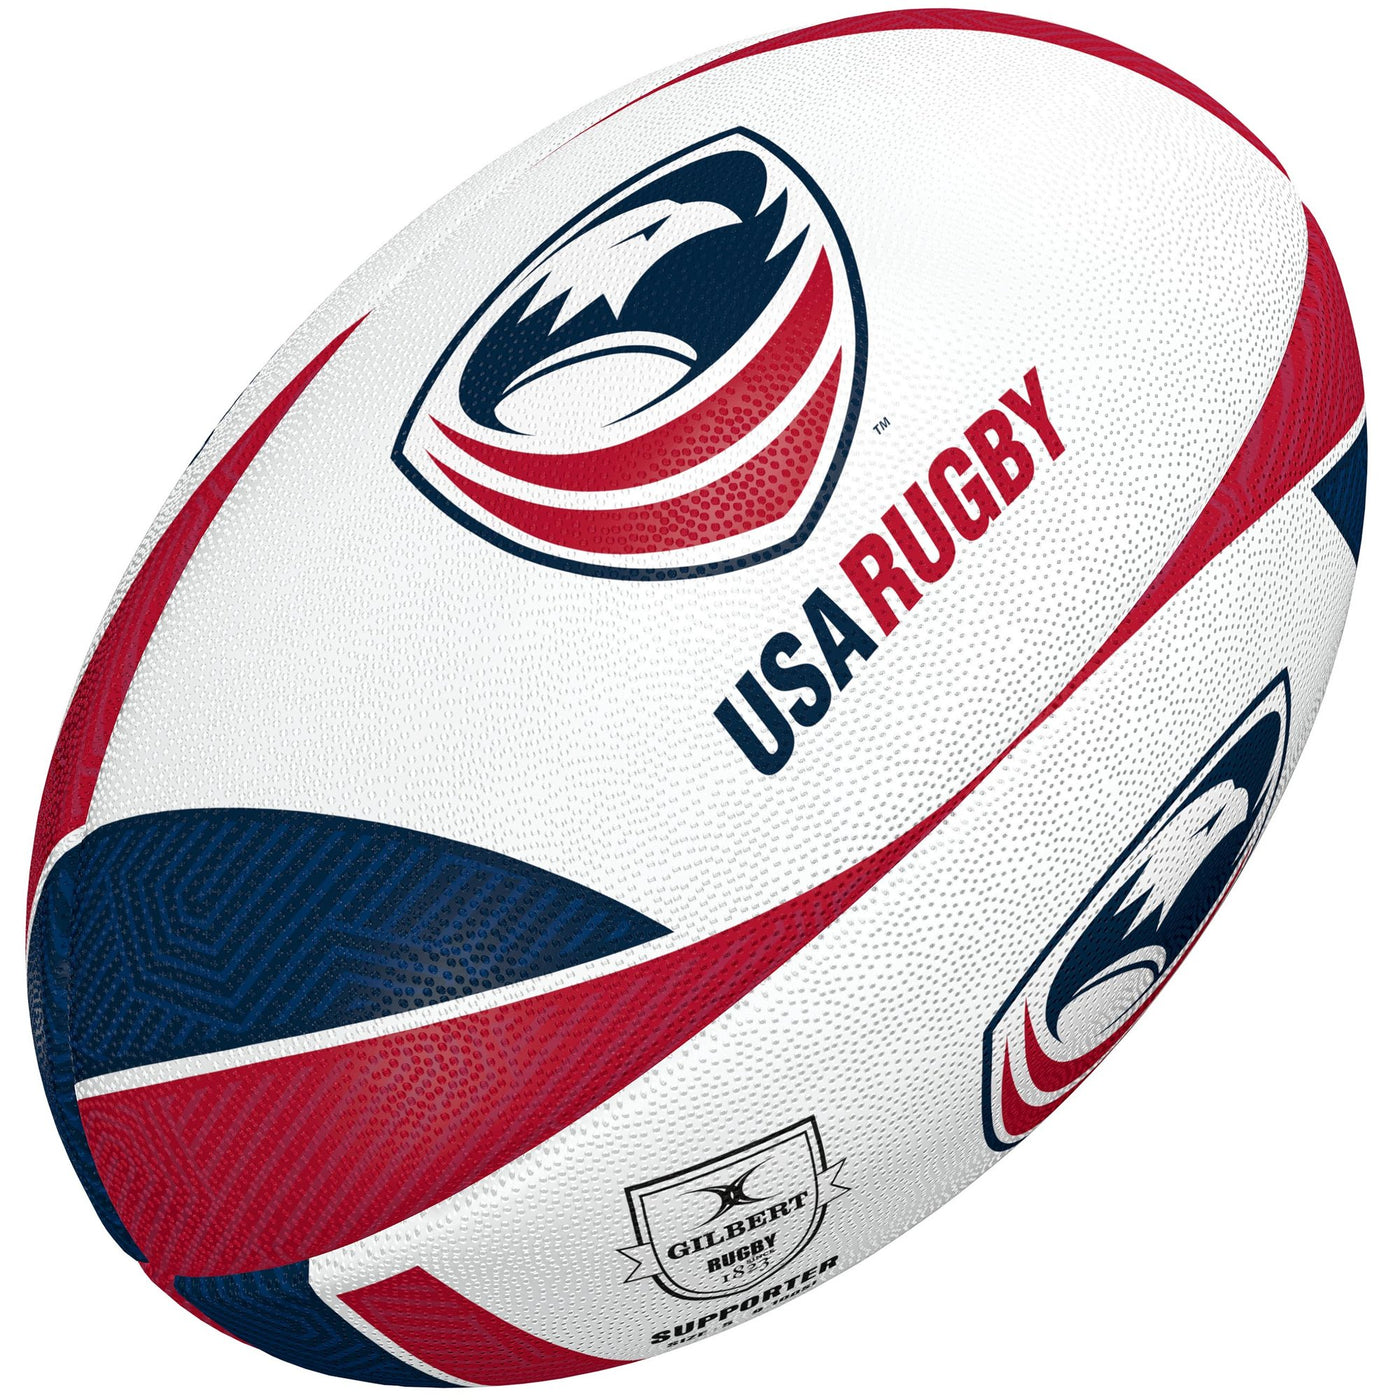 USA Rugbybal Supporter